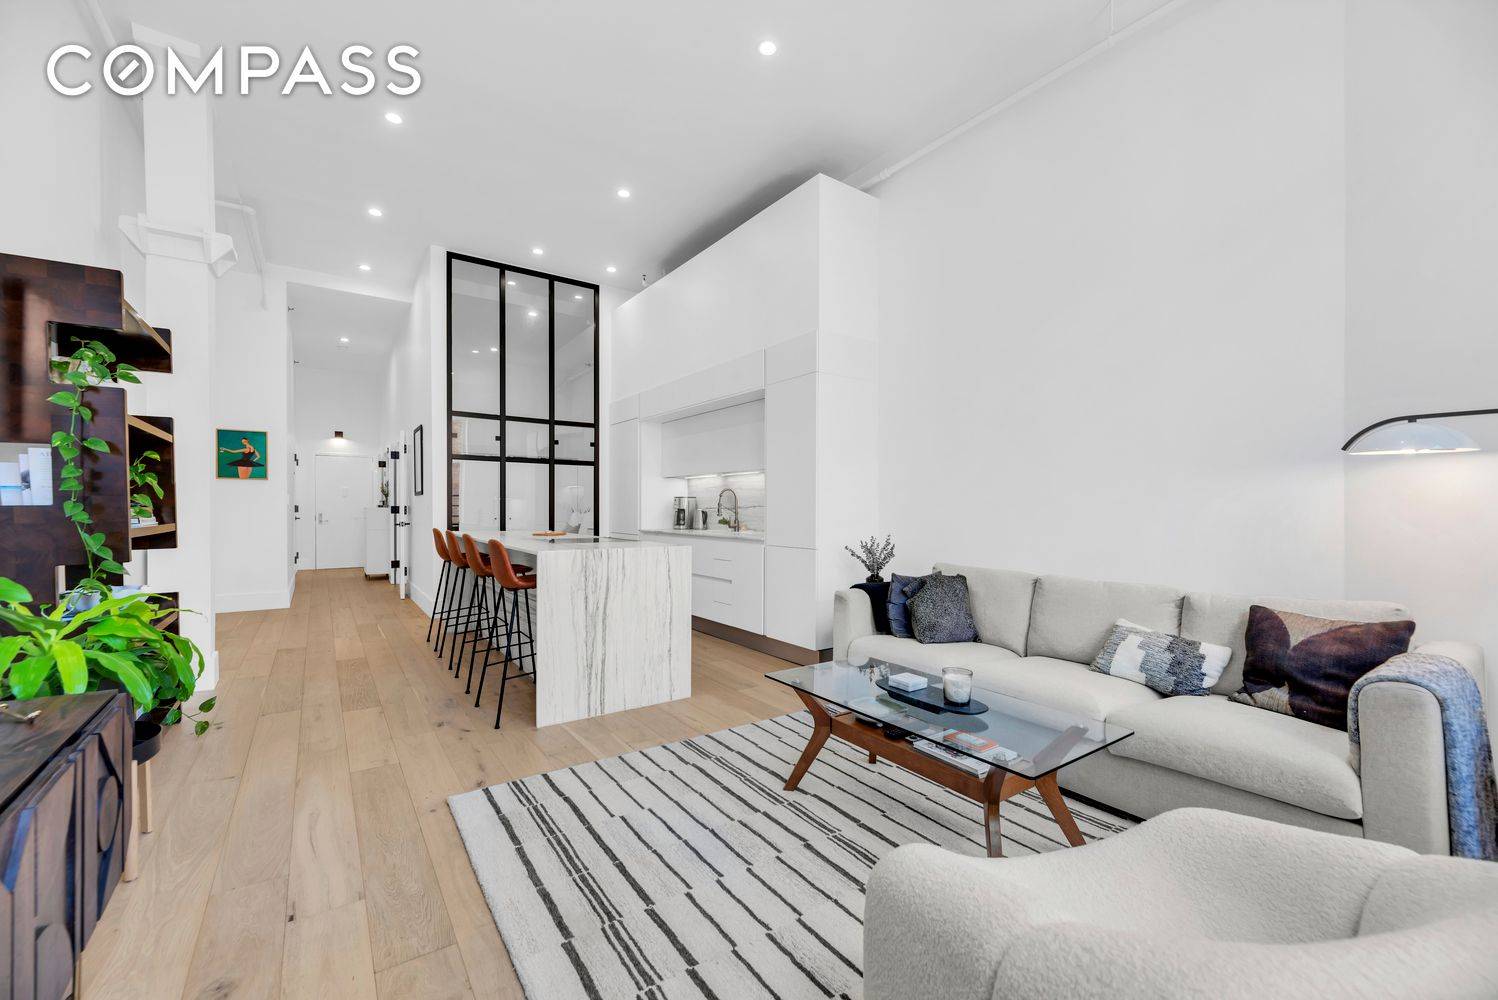 Clinton Hill Contemporary luxury Loft Beautiful Fully Renovated 1BD 1BA, Open Layout with Soaring 13 Ceilings and Oversized Windows, Western Exposure, Oak Hardwood Floors, Chef s Kitchen with Top of ...